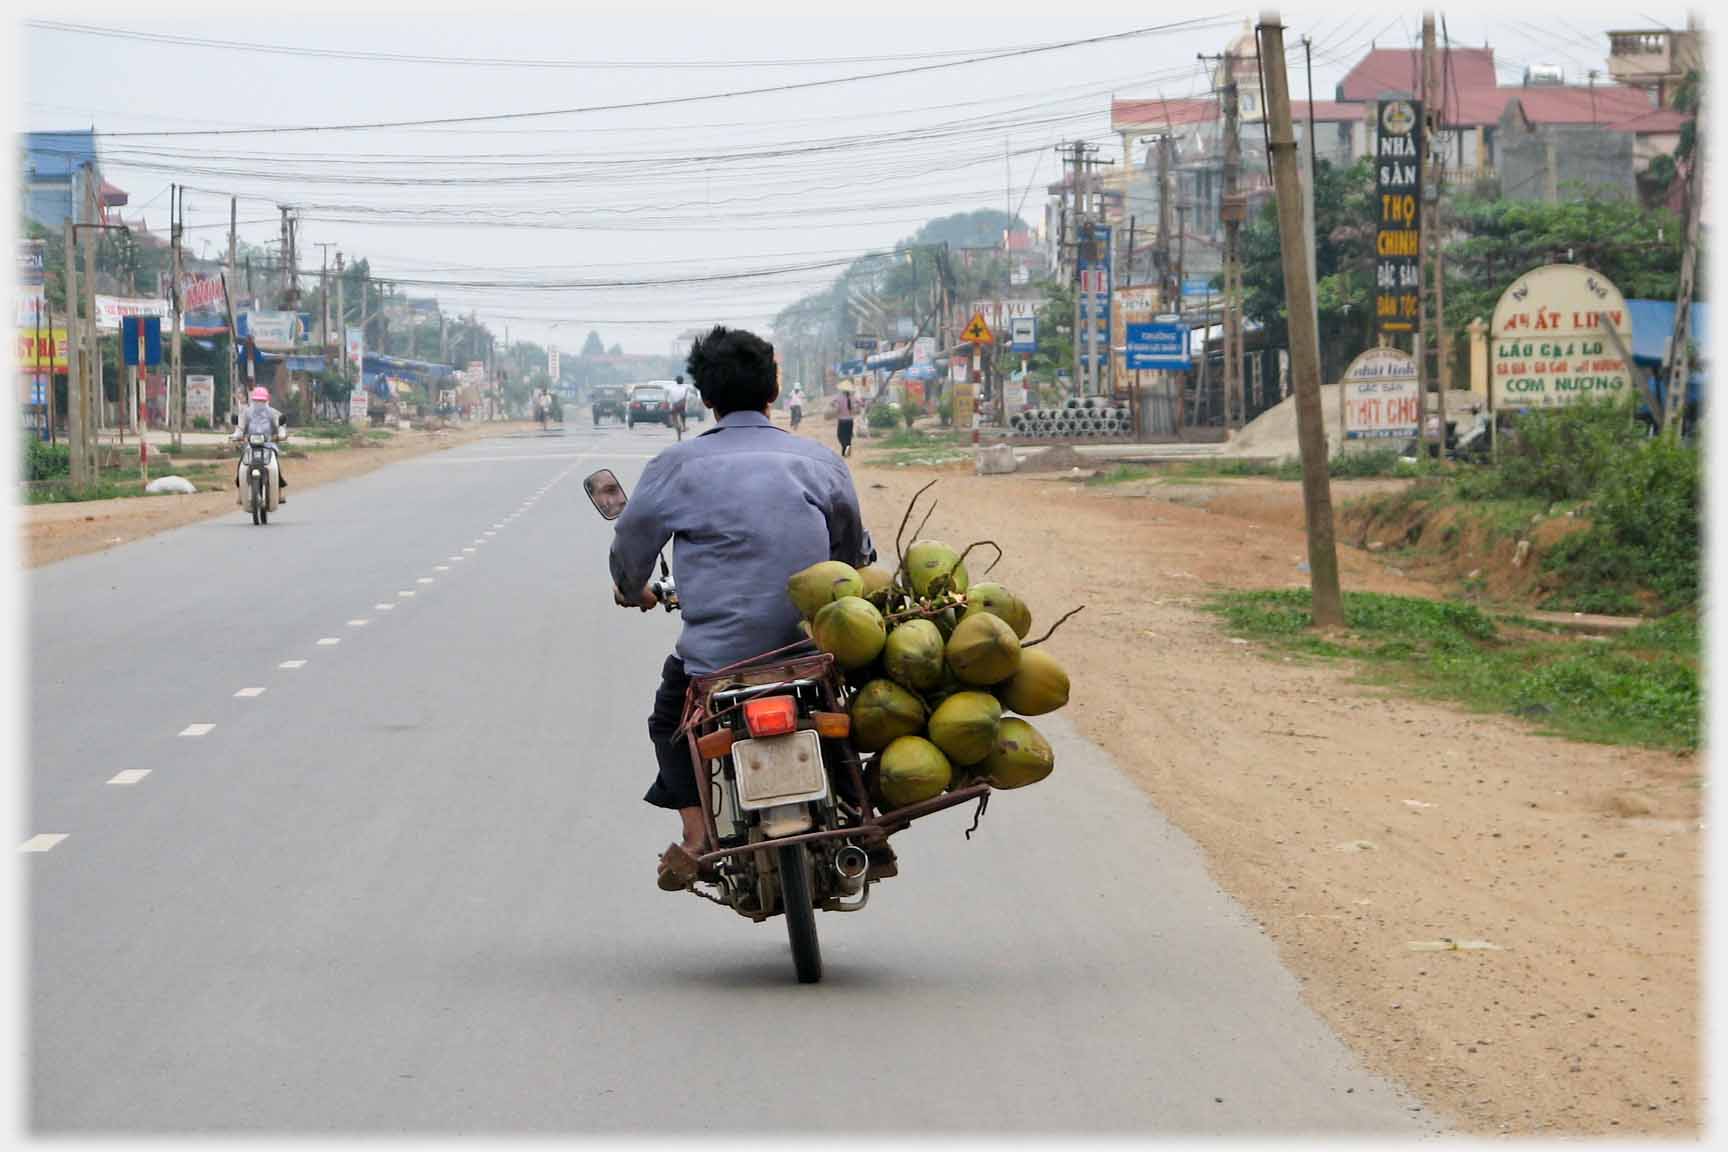 Motorbike being ridden leaning to one side to balance large load of coconuts on other side.